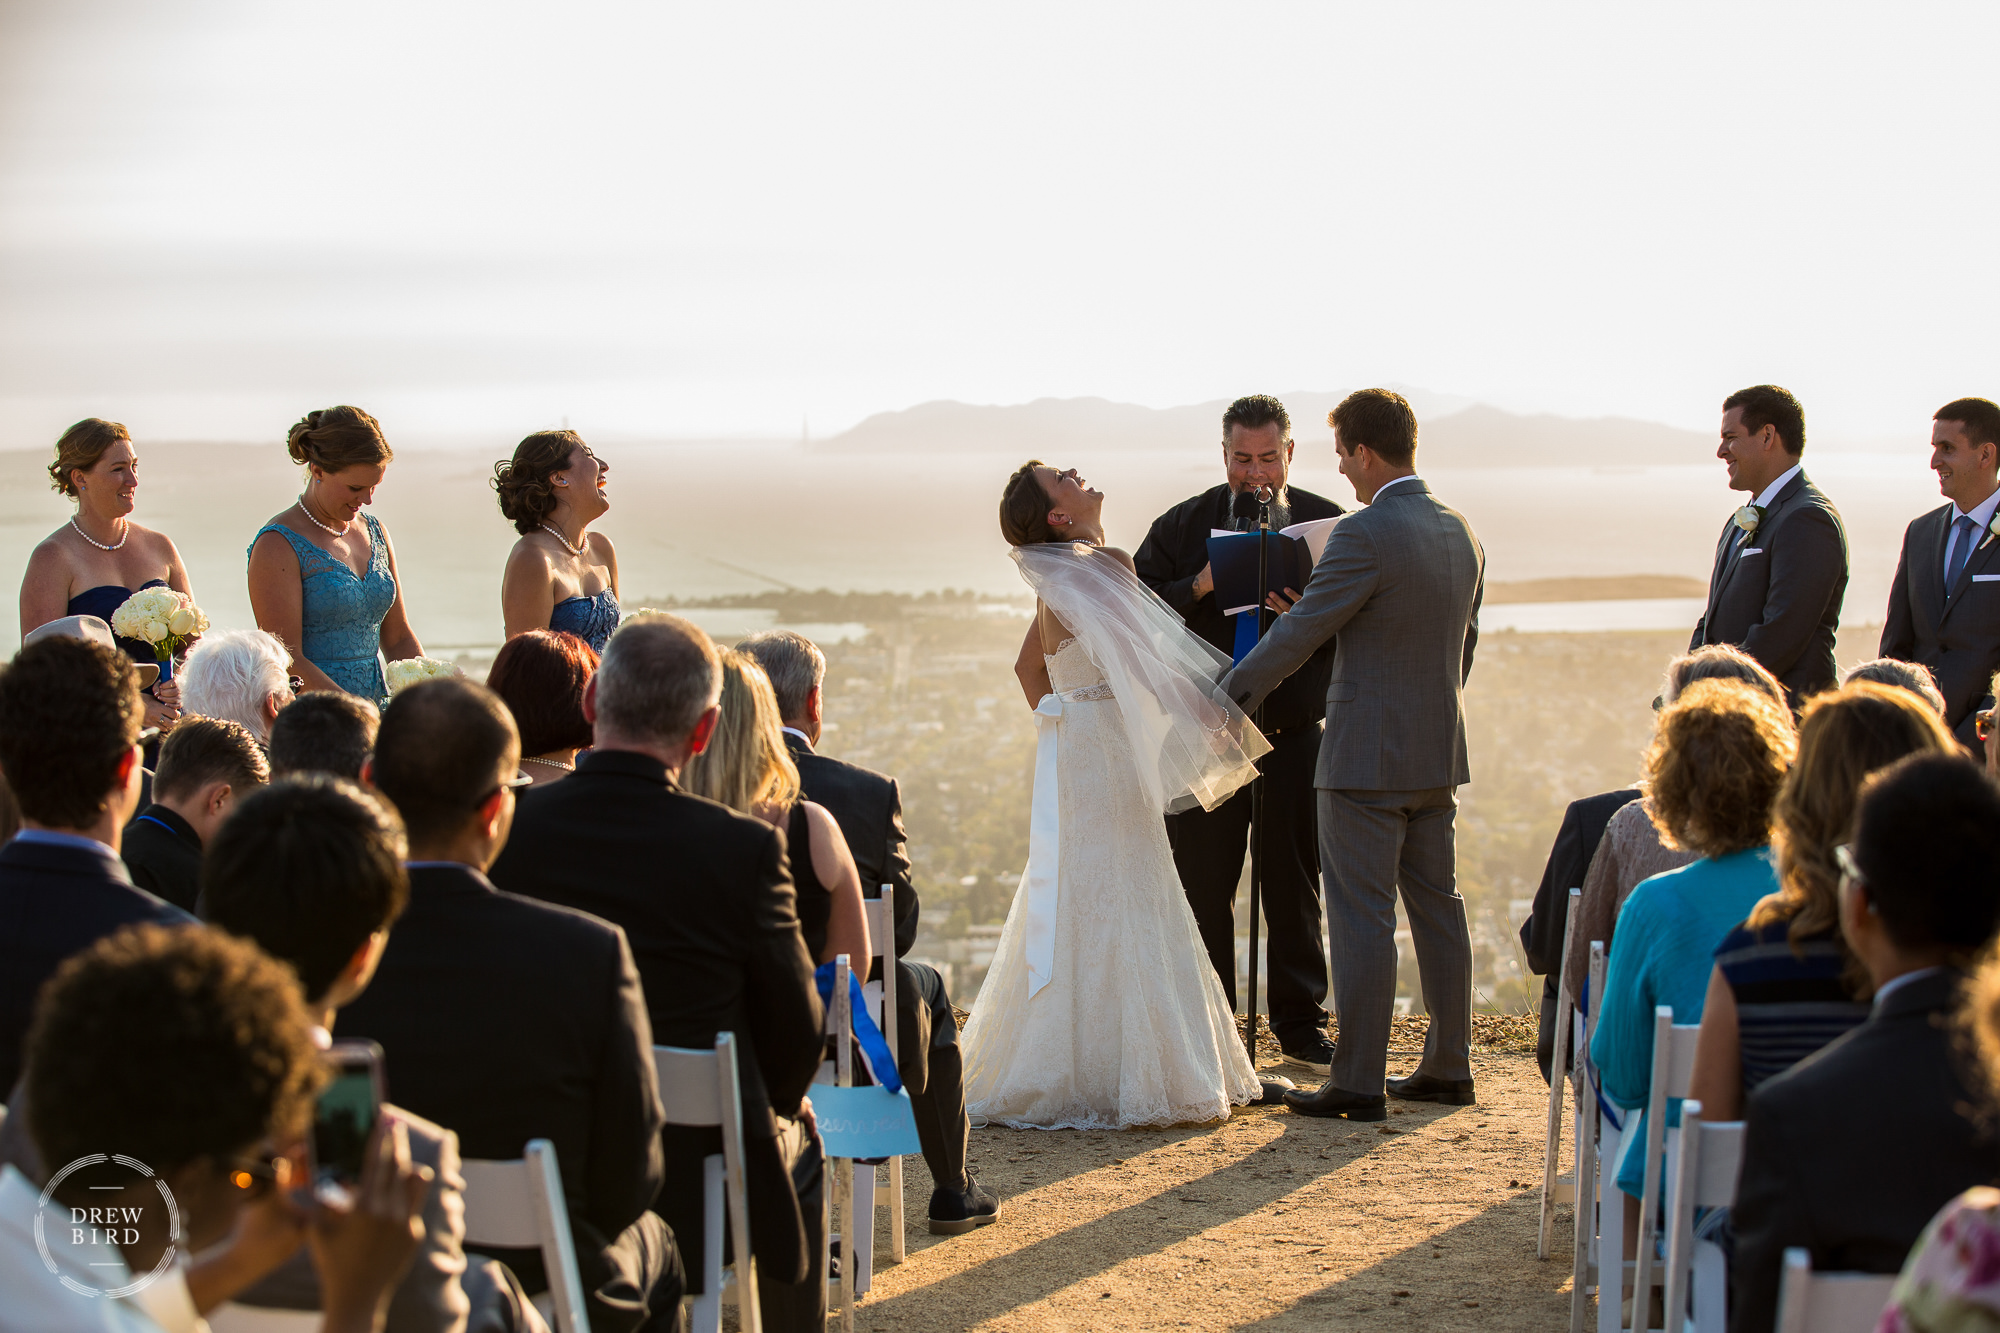 Wedding ceremony overlooking the San Francisco Bay at sunset. Lawrence Hall of Science wedding venue at UC Berkeley.